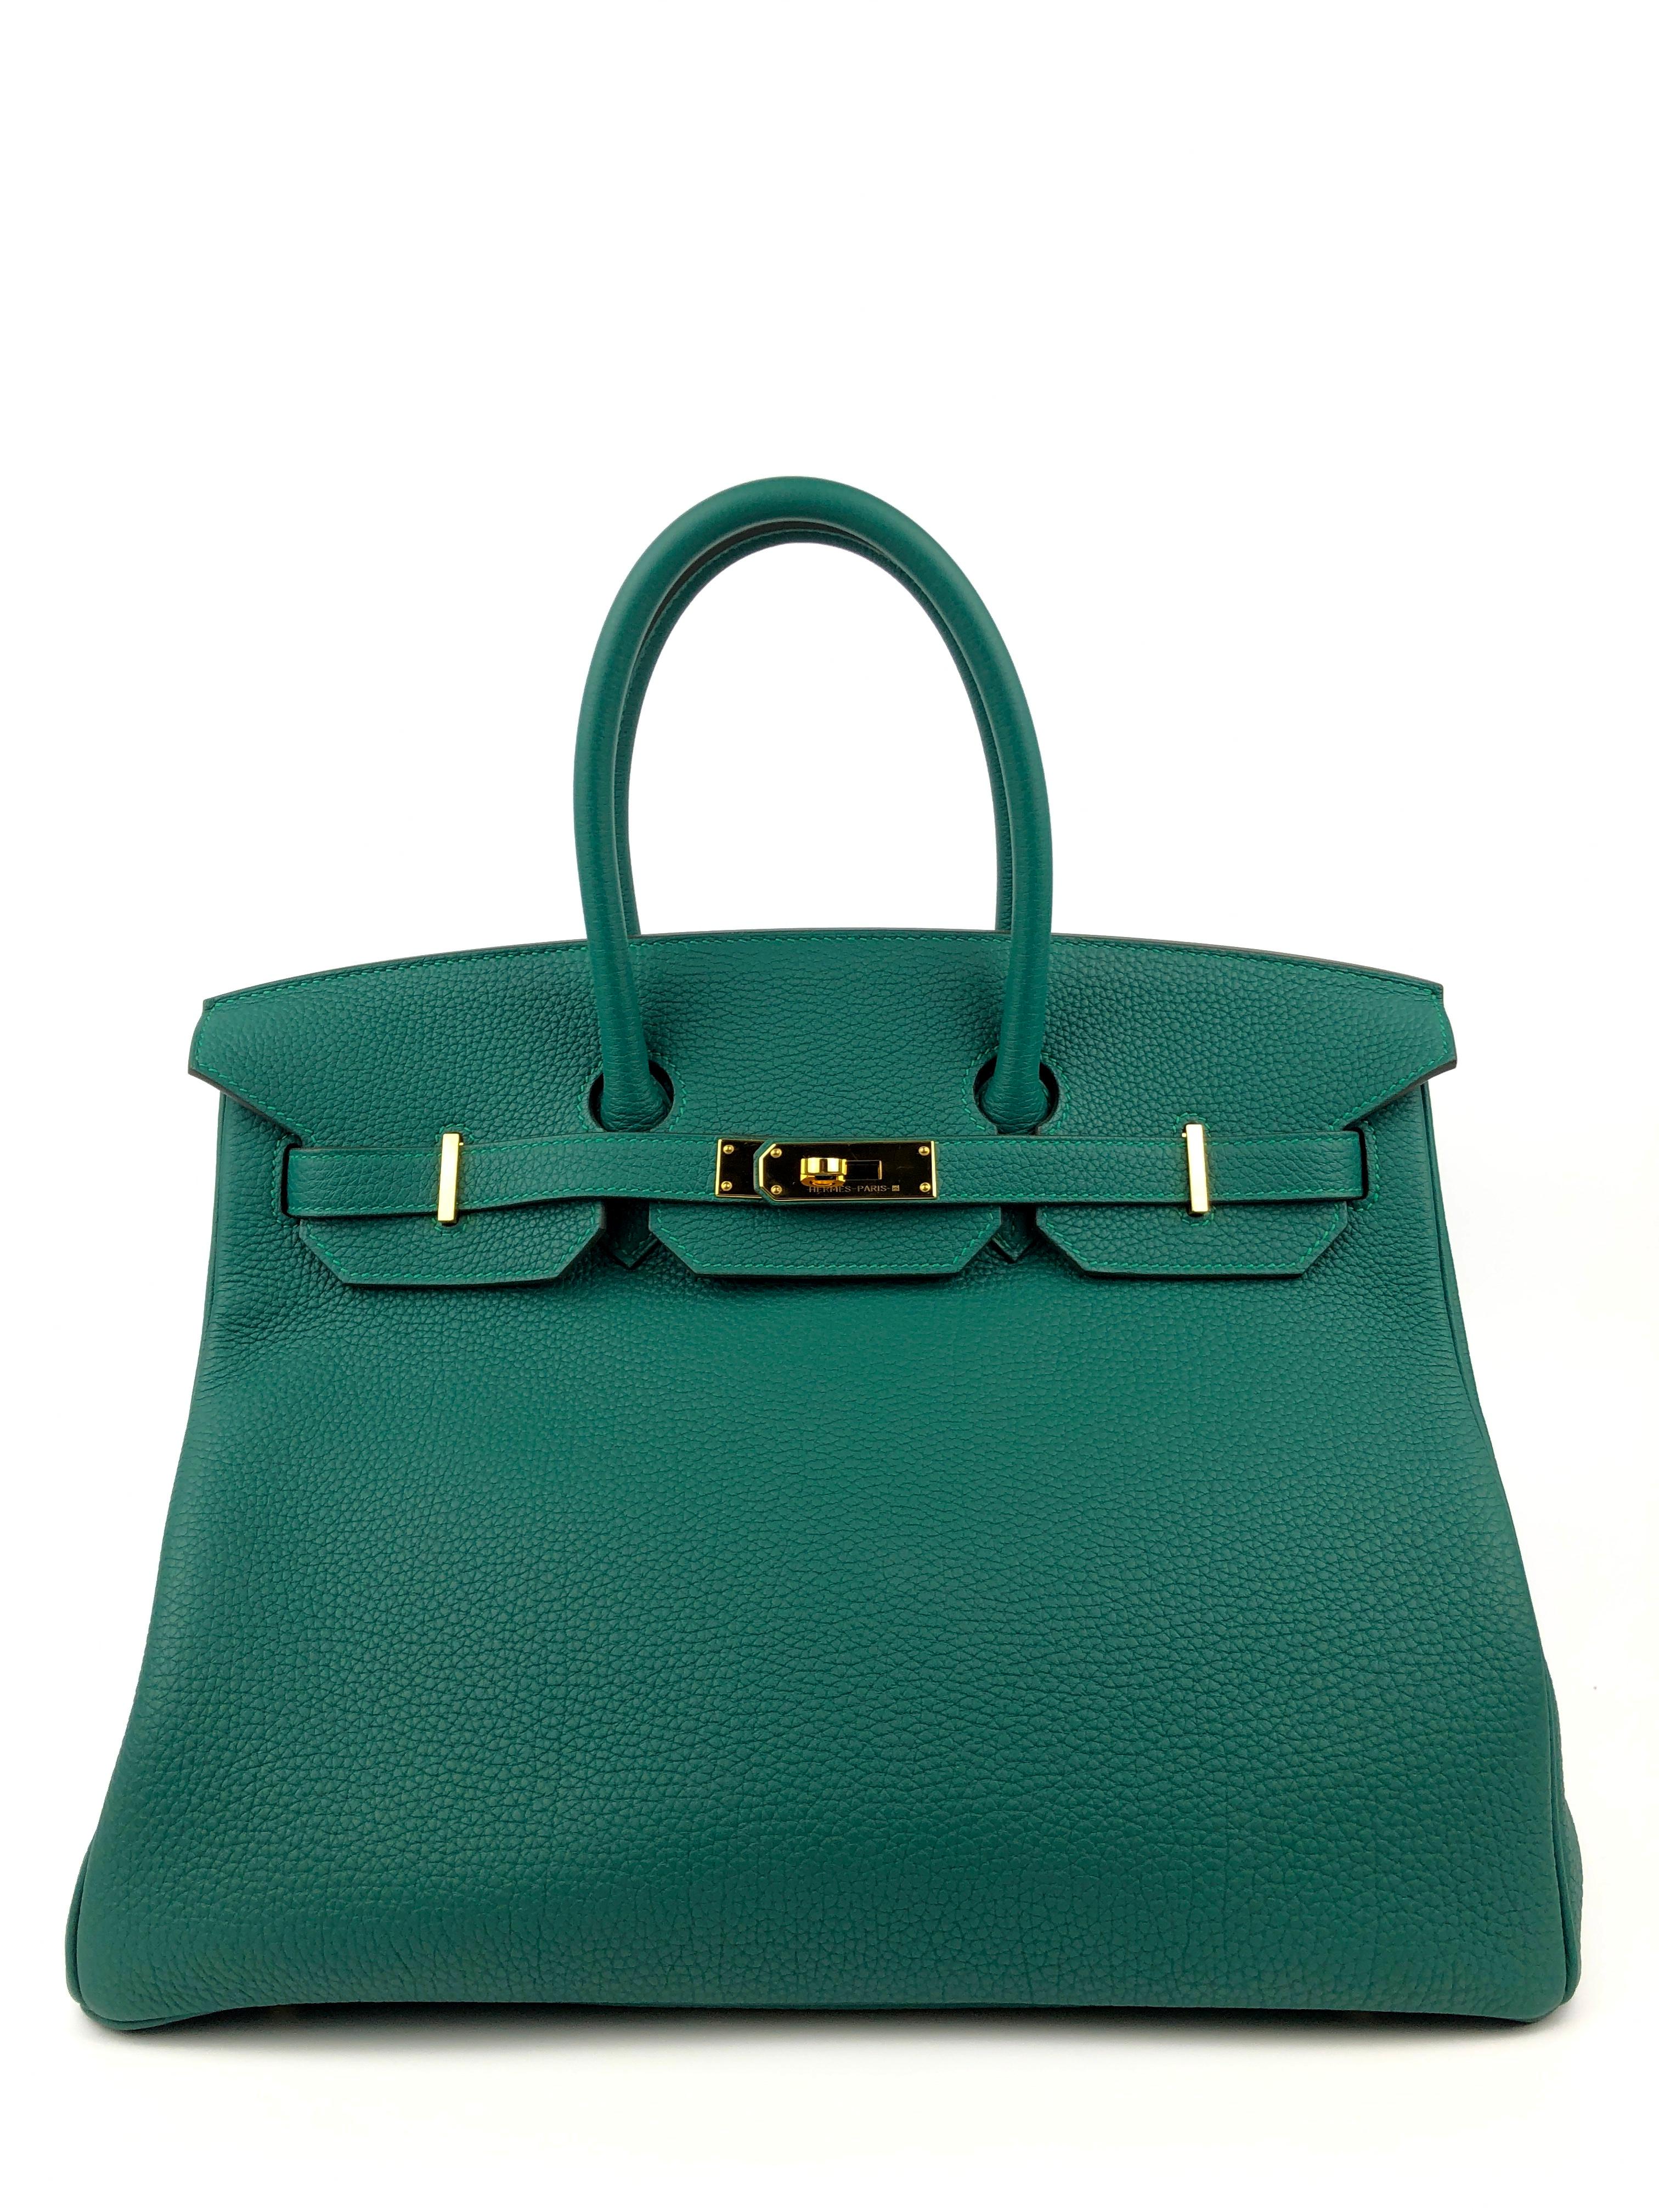 RARE HERMES BIRKIN 35 MALACHITE TOGO GOLD HARDWARE. Pristine Condition light hairlines on hardware excellent corners and structure. X Stamp 2016.

Shop with Confidence from Lux Addicts. Authenticity Guaranteed!